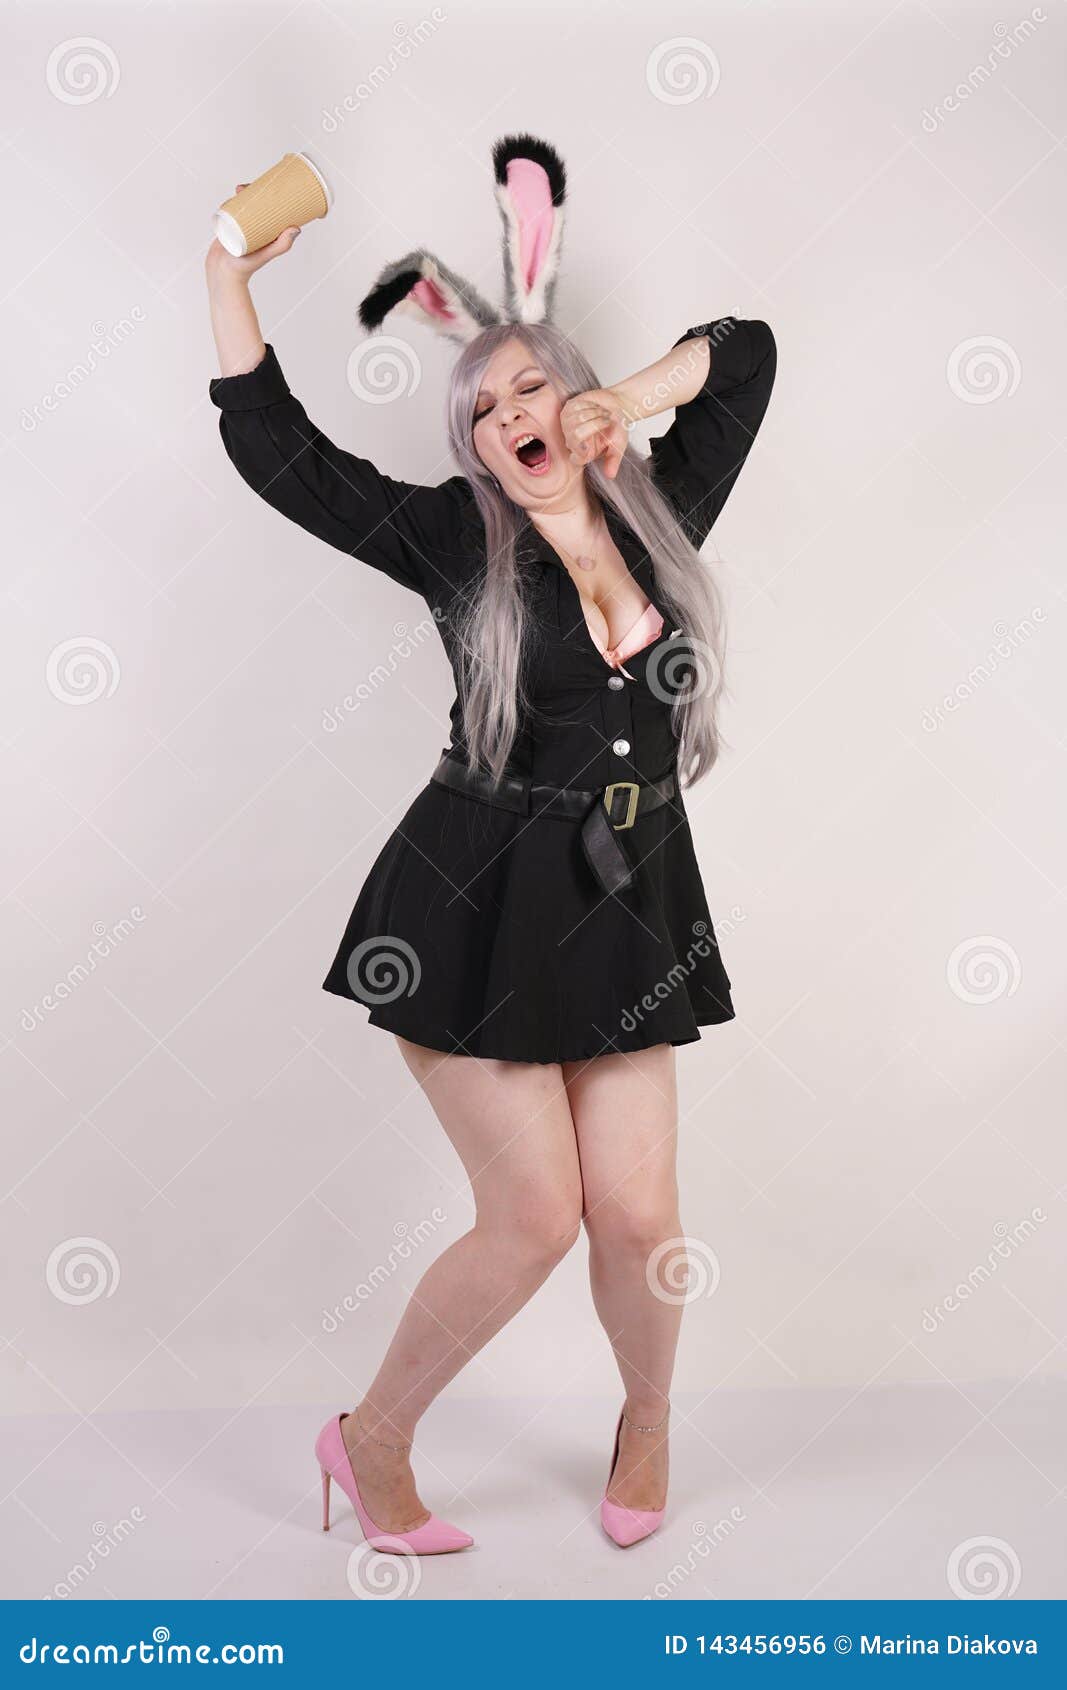 Cute Chubby Anime Girl with a Coffee in a Paper Cup on a White Background  in the Studio Stock Photo - Image of happy, bodypositive: 143456956